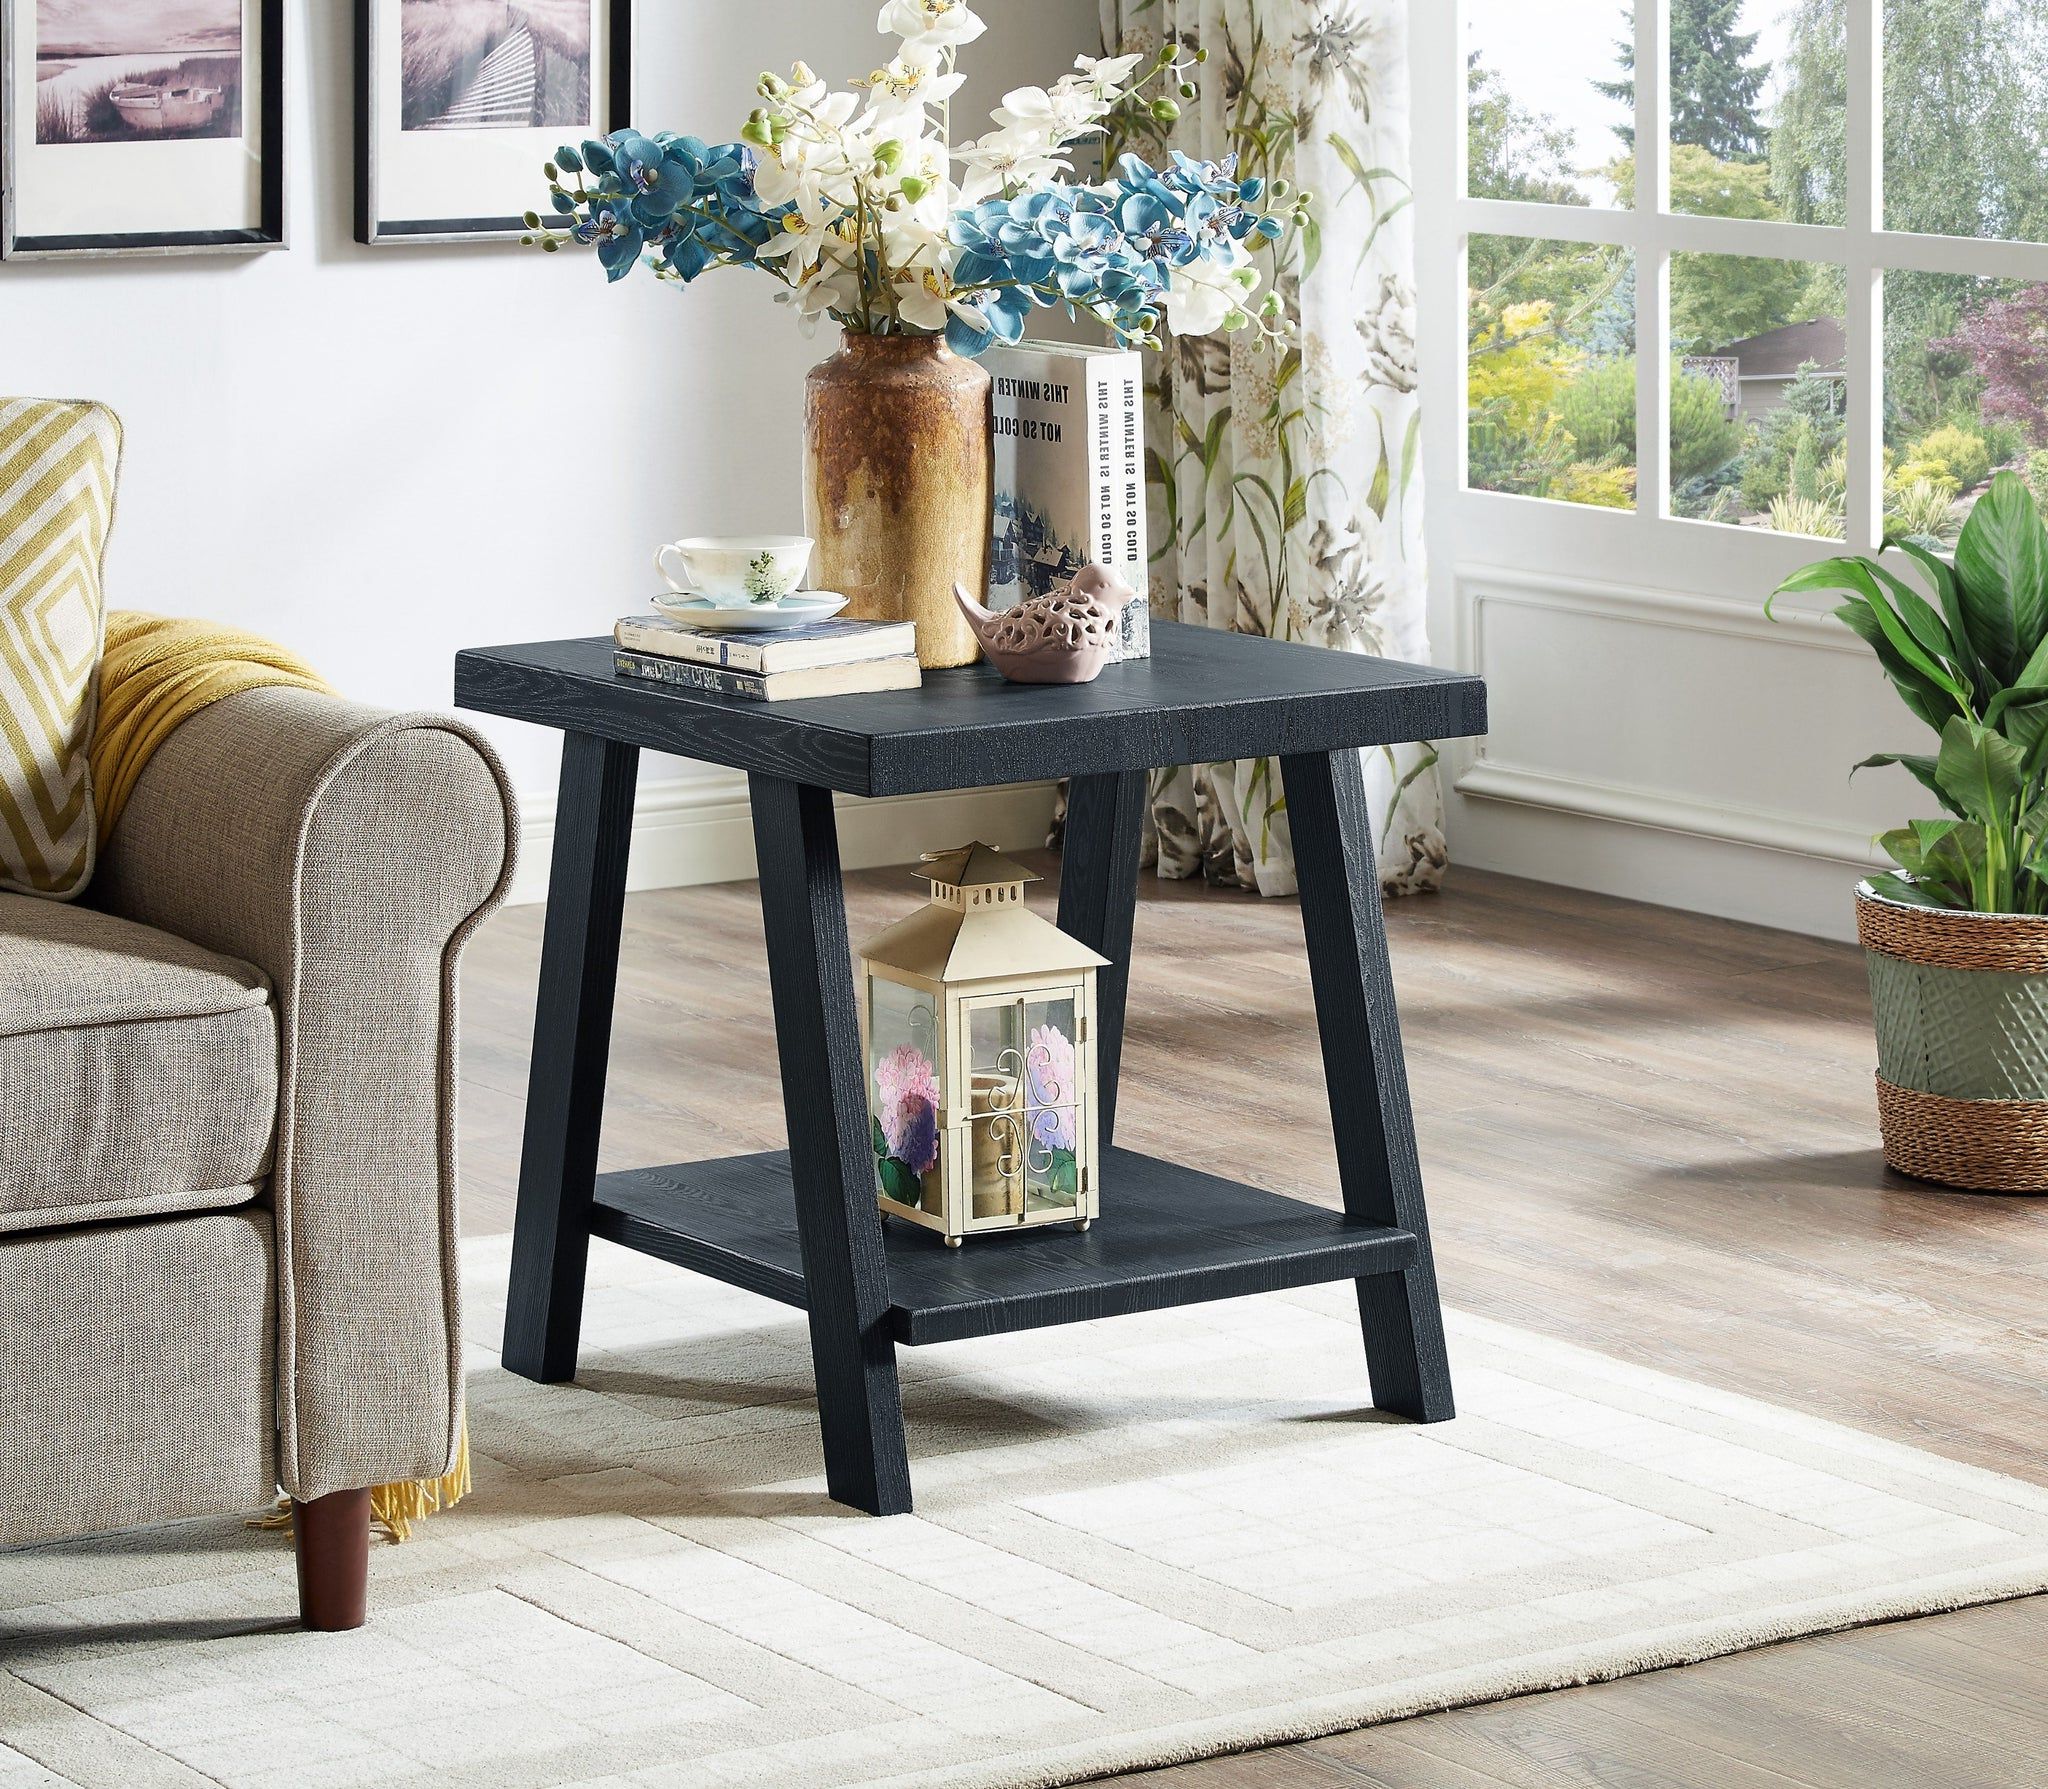 Athens Contemporary Replicated Wood Shelf Coffee Set Table In Black Fi Throughout Most Recently Released Pemberly Row Replicated Wood Coffee Tables (View 5 of 15)